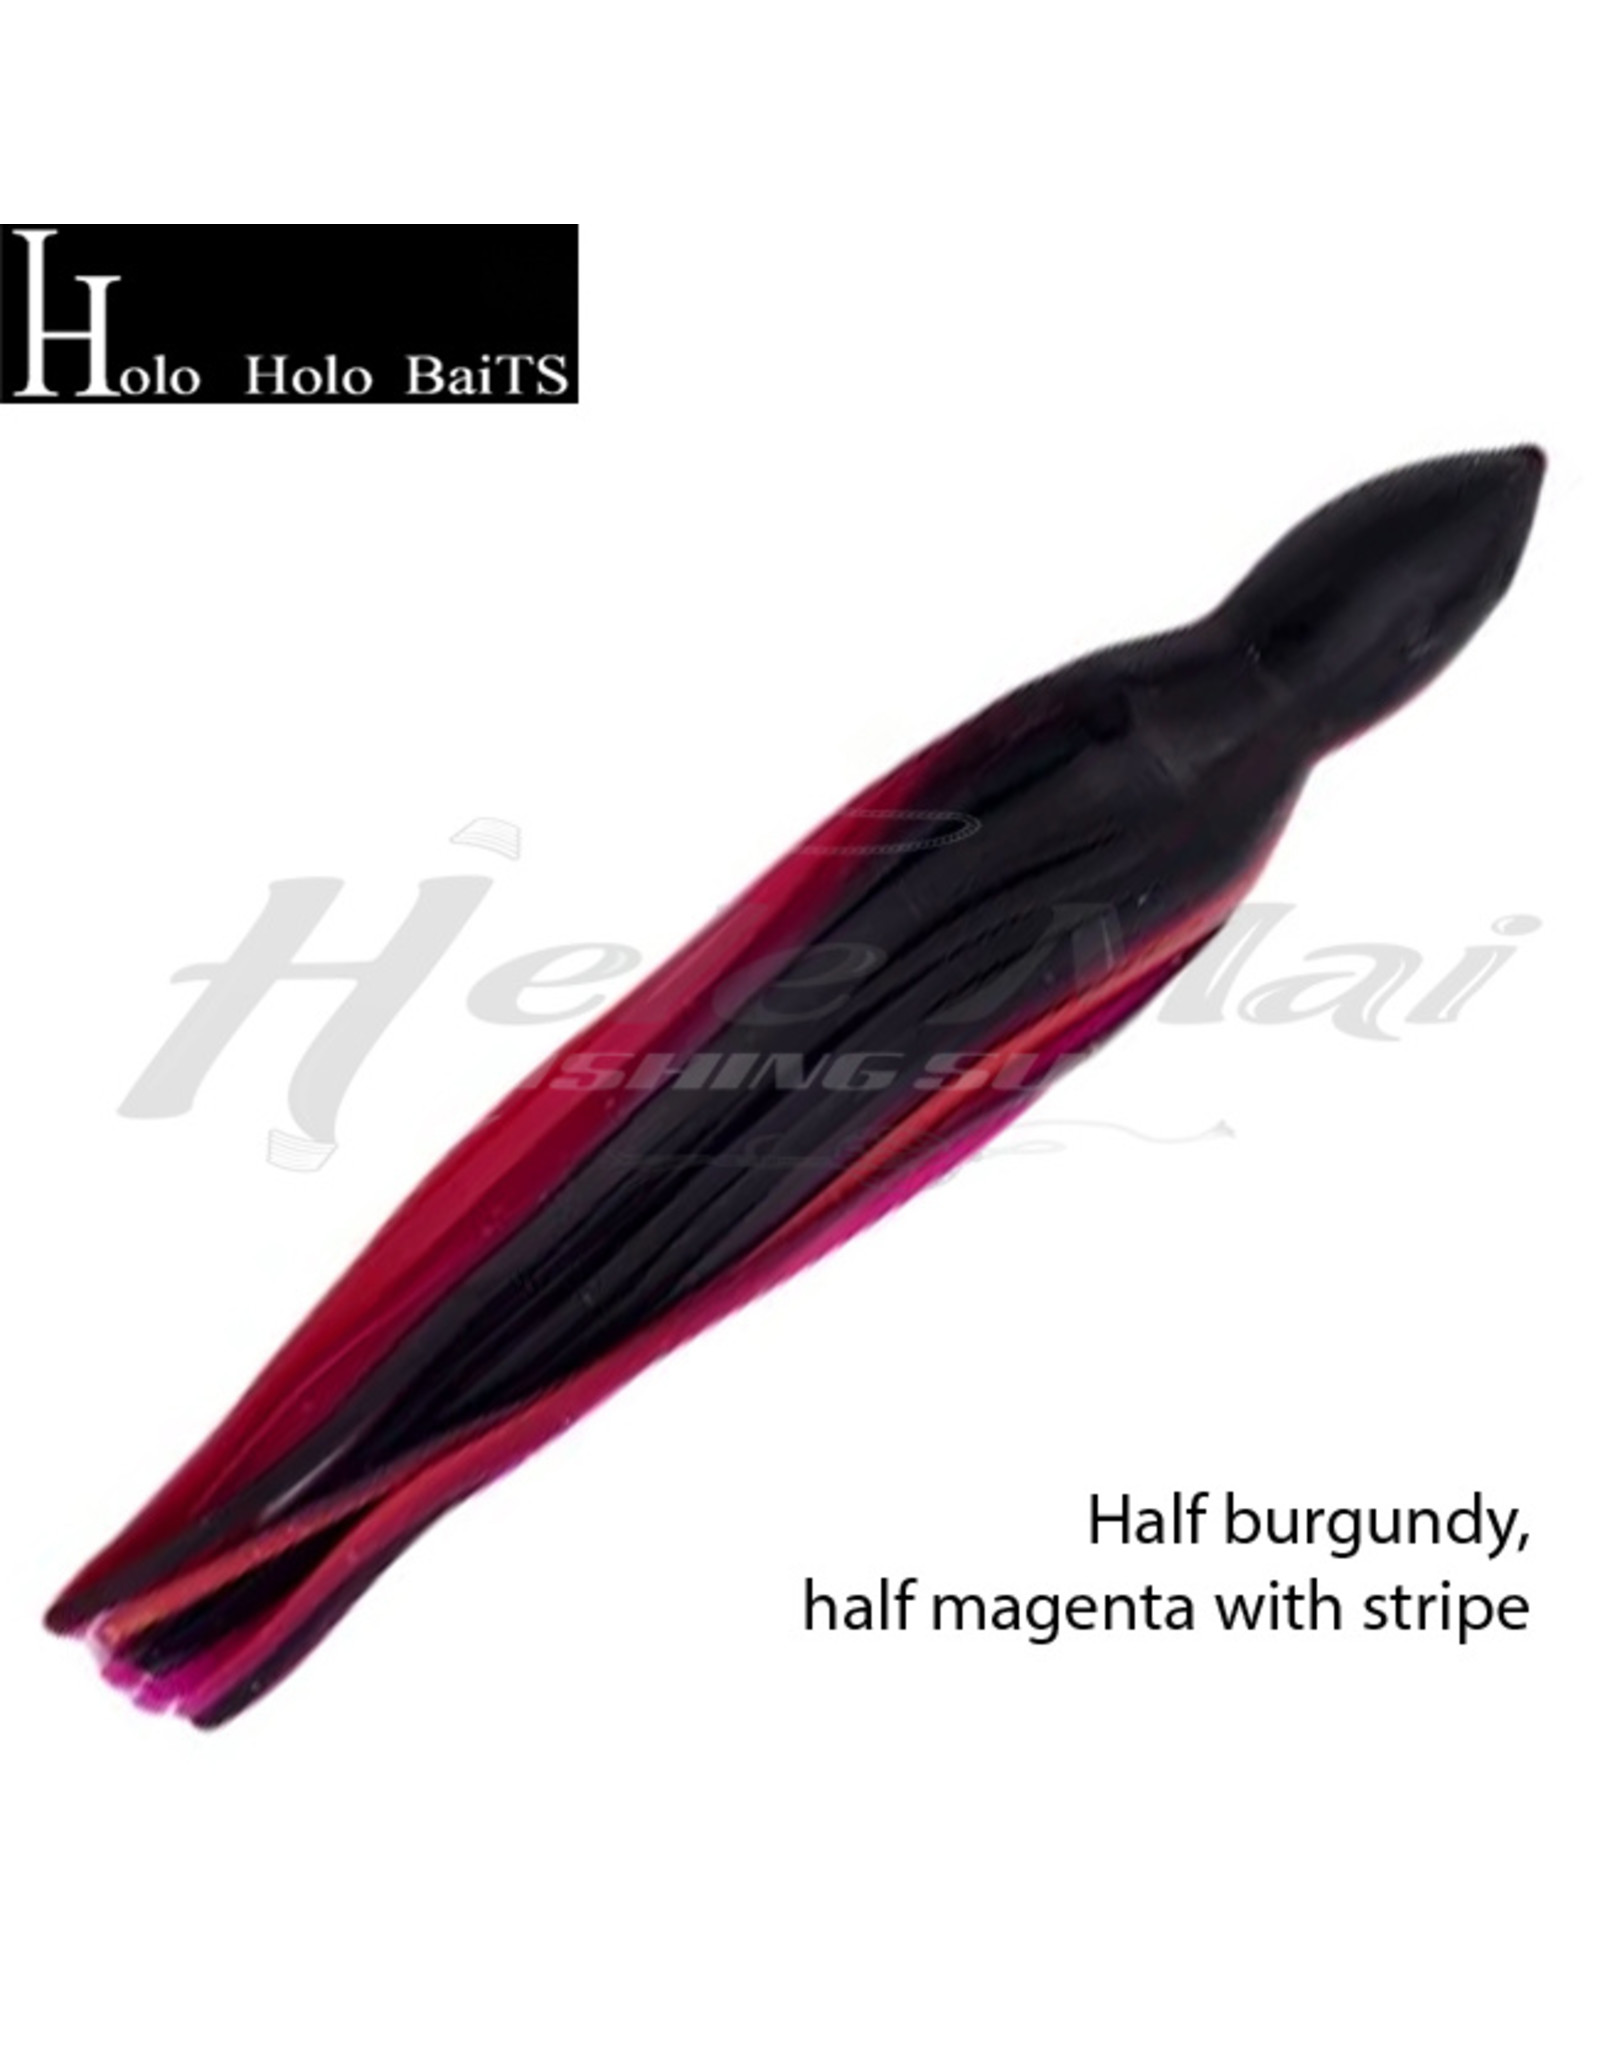 HOLO HOLO HAWAII (HHH) HH, 7" SQUID SKIRT BLACK RED 1111